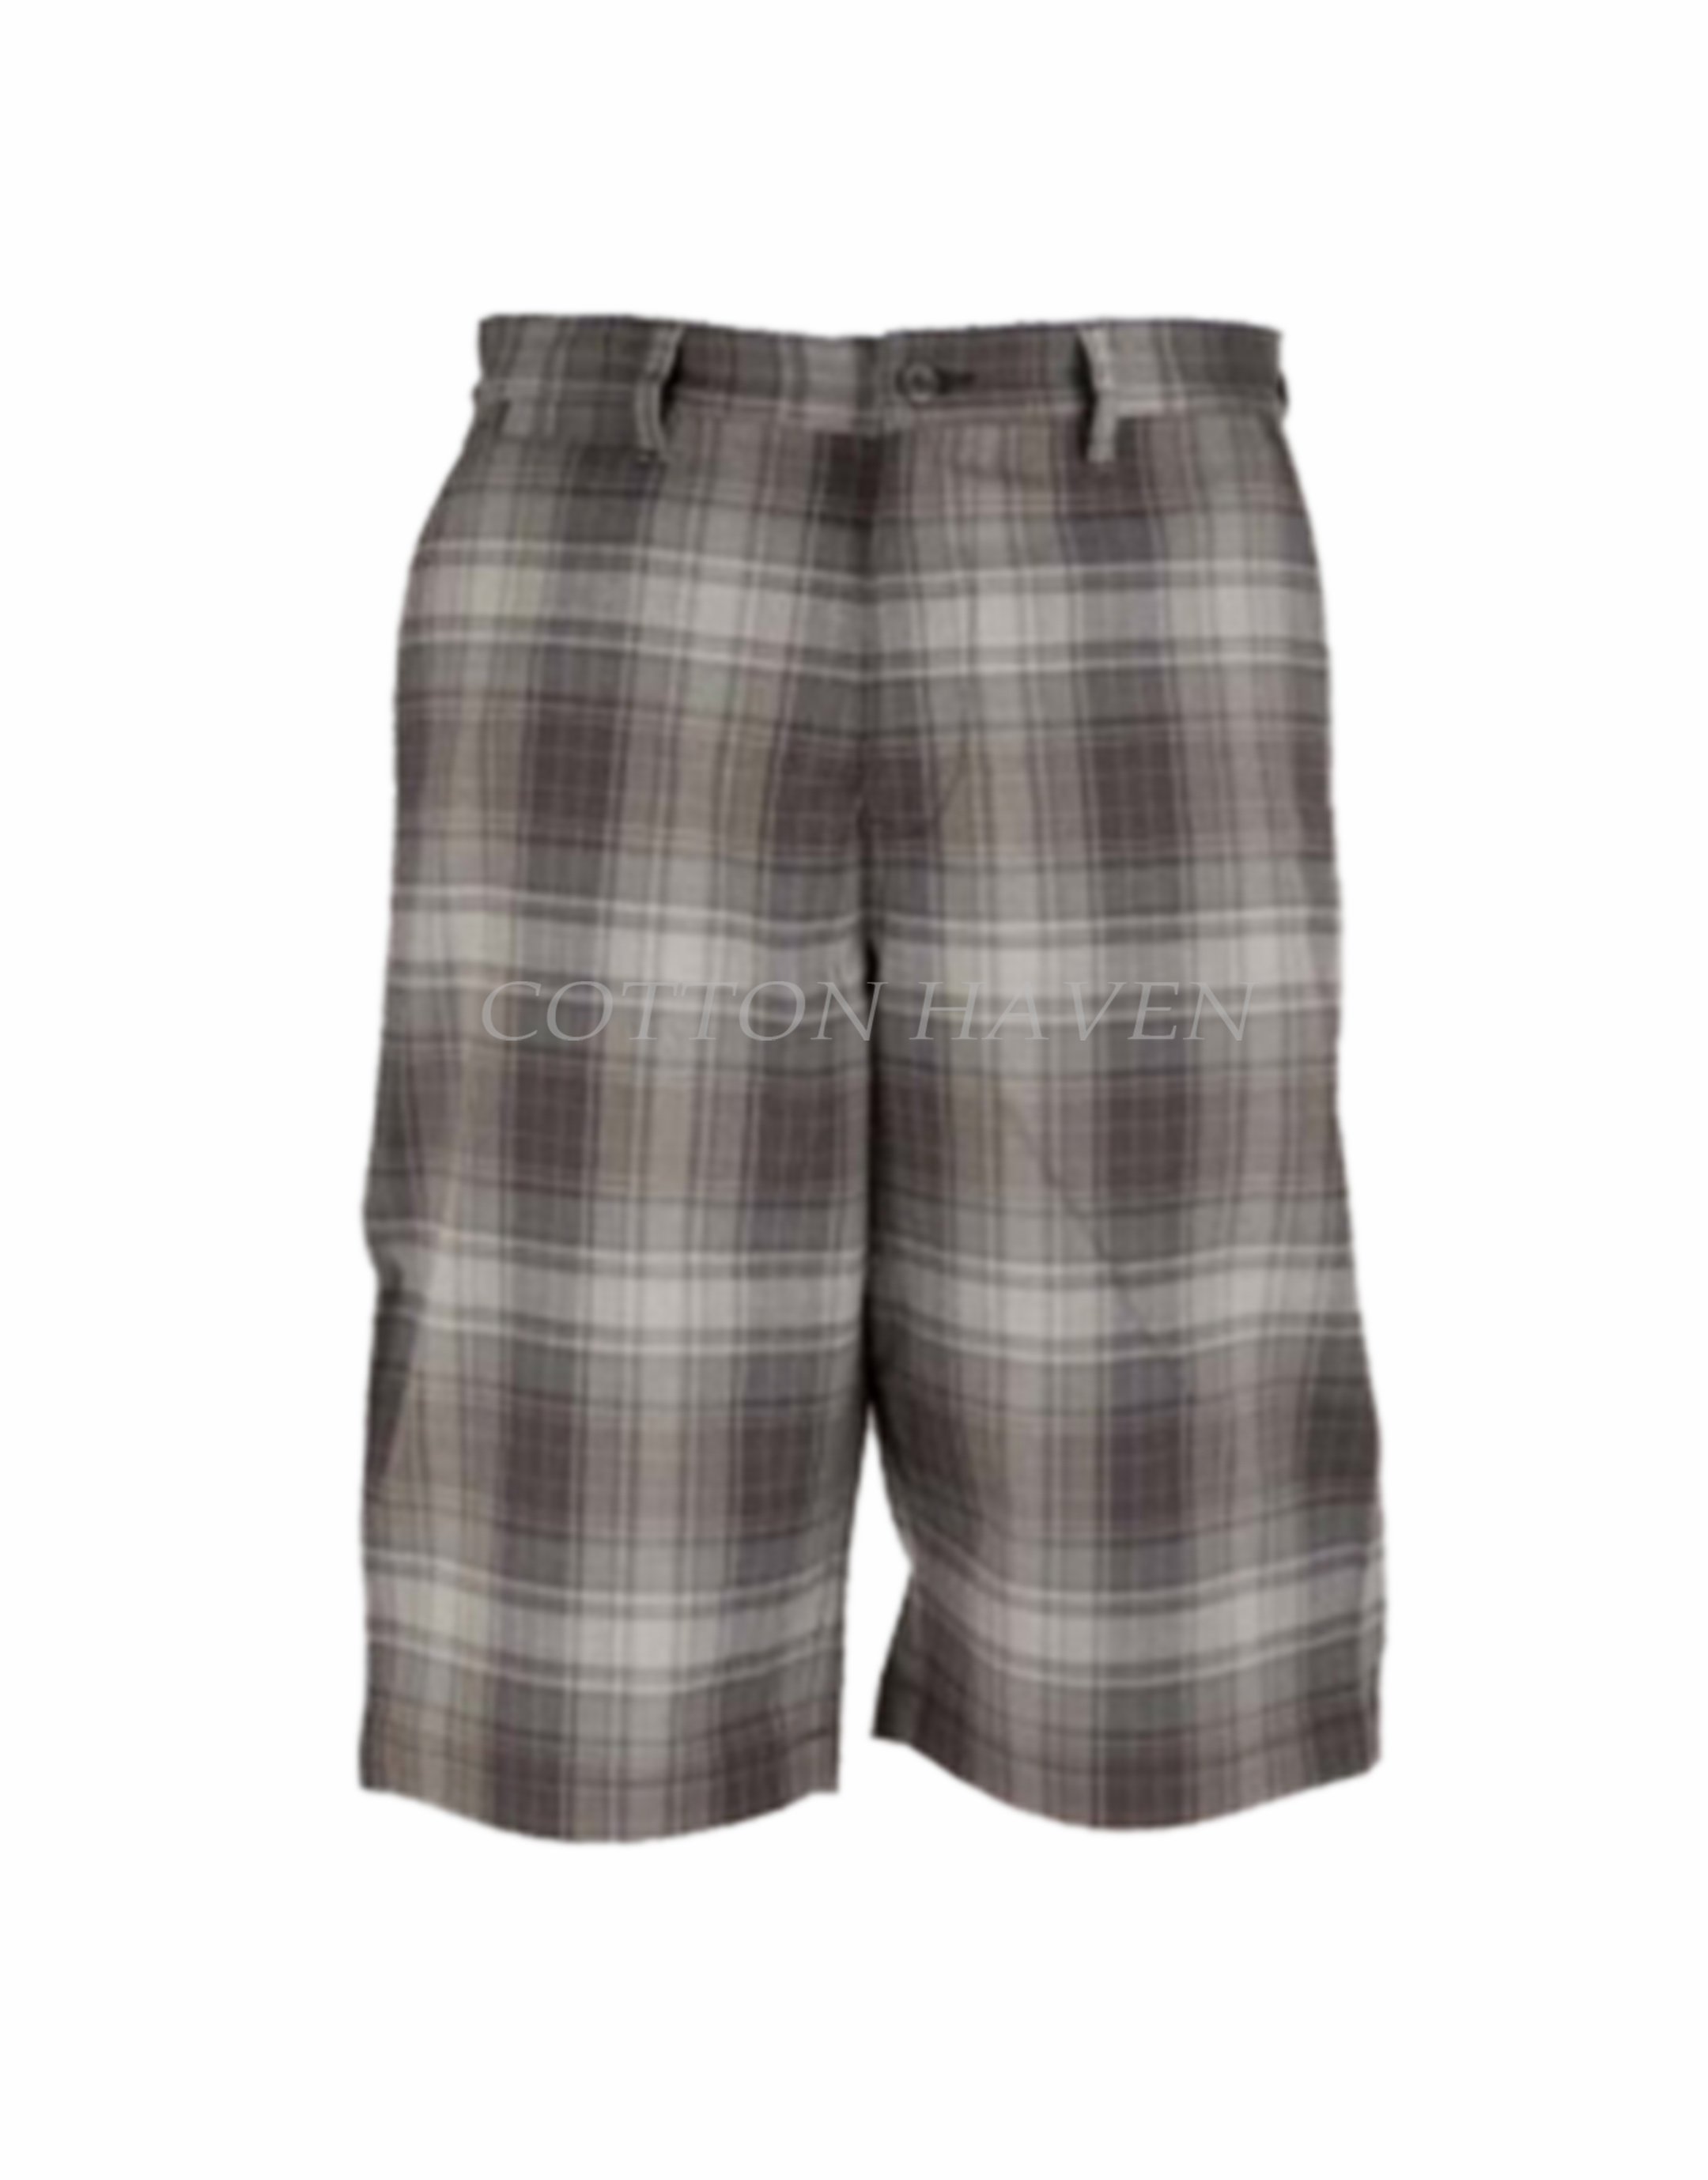 Men Cool Stretch Check Shorts CATROM-GR 191616 - Cotton Haven Apparels ...